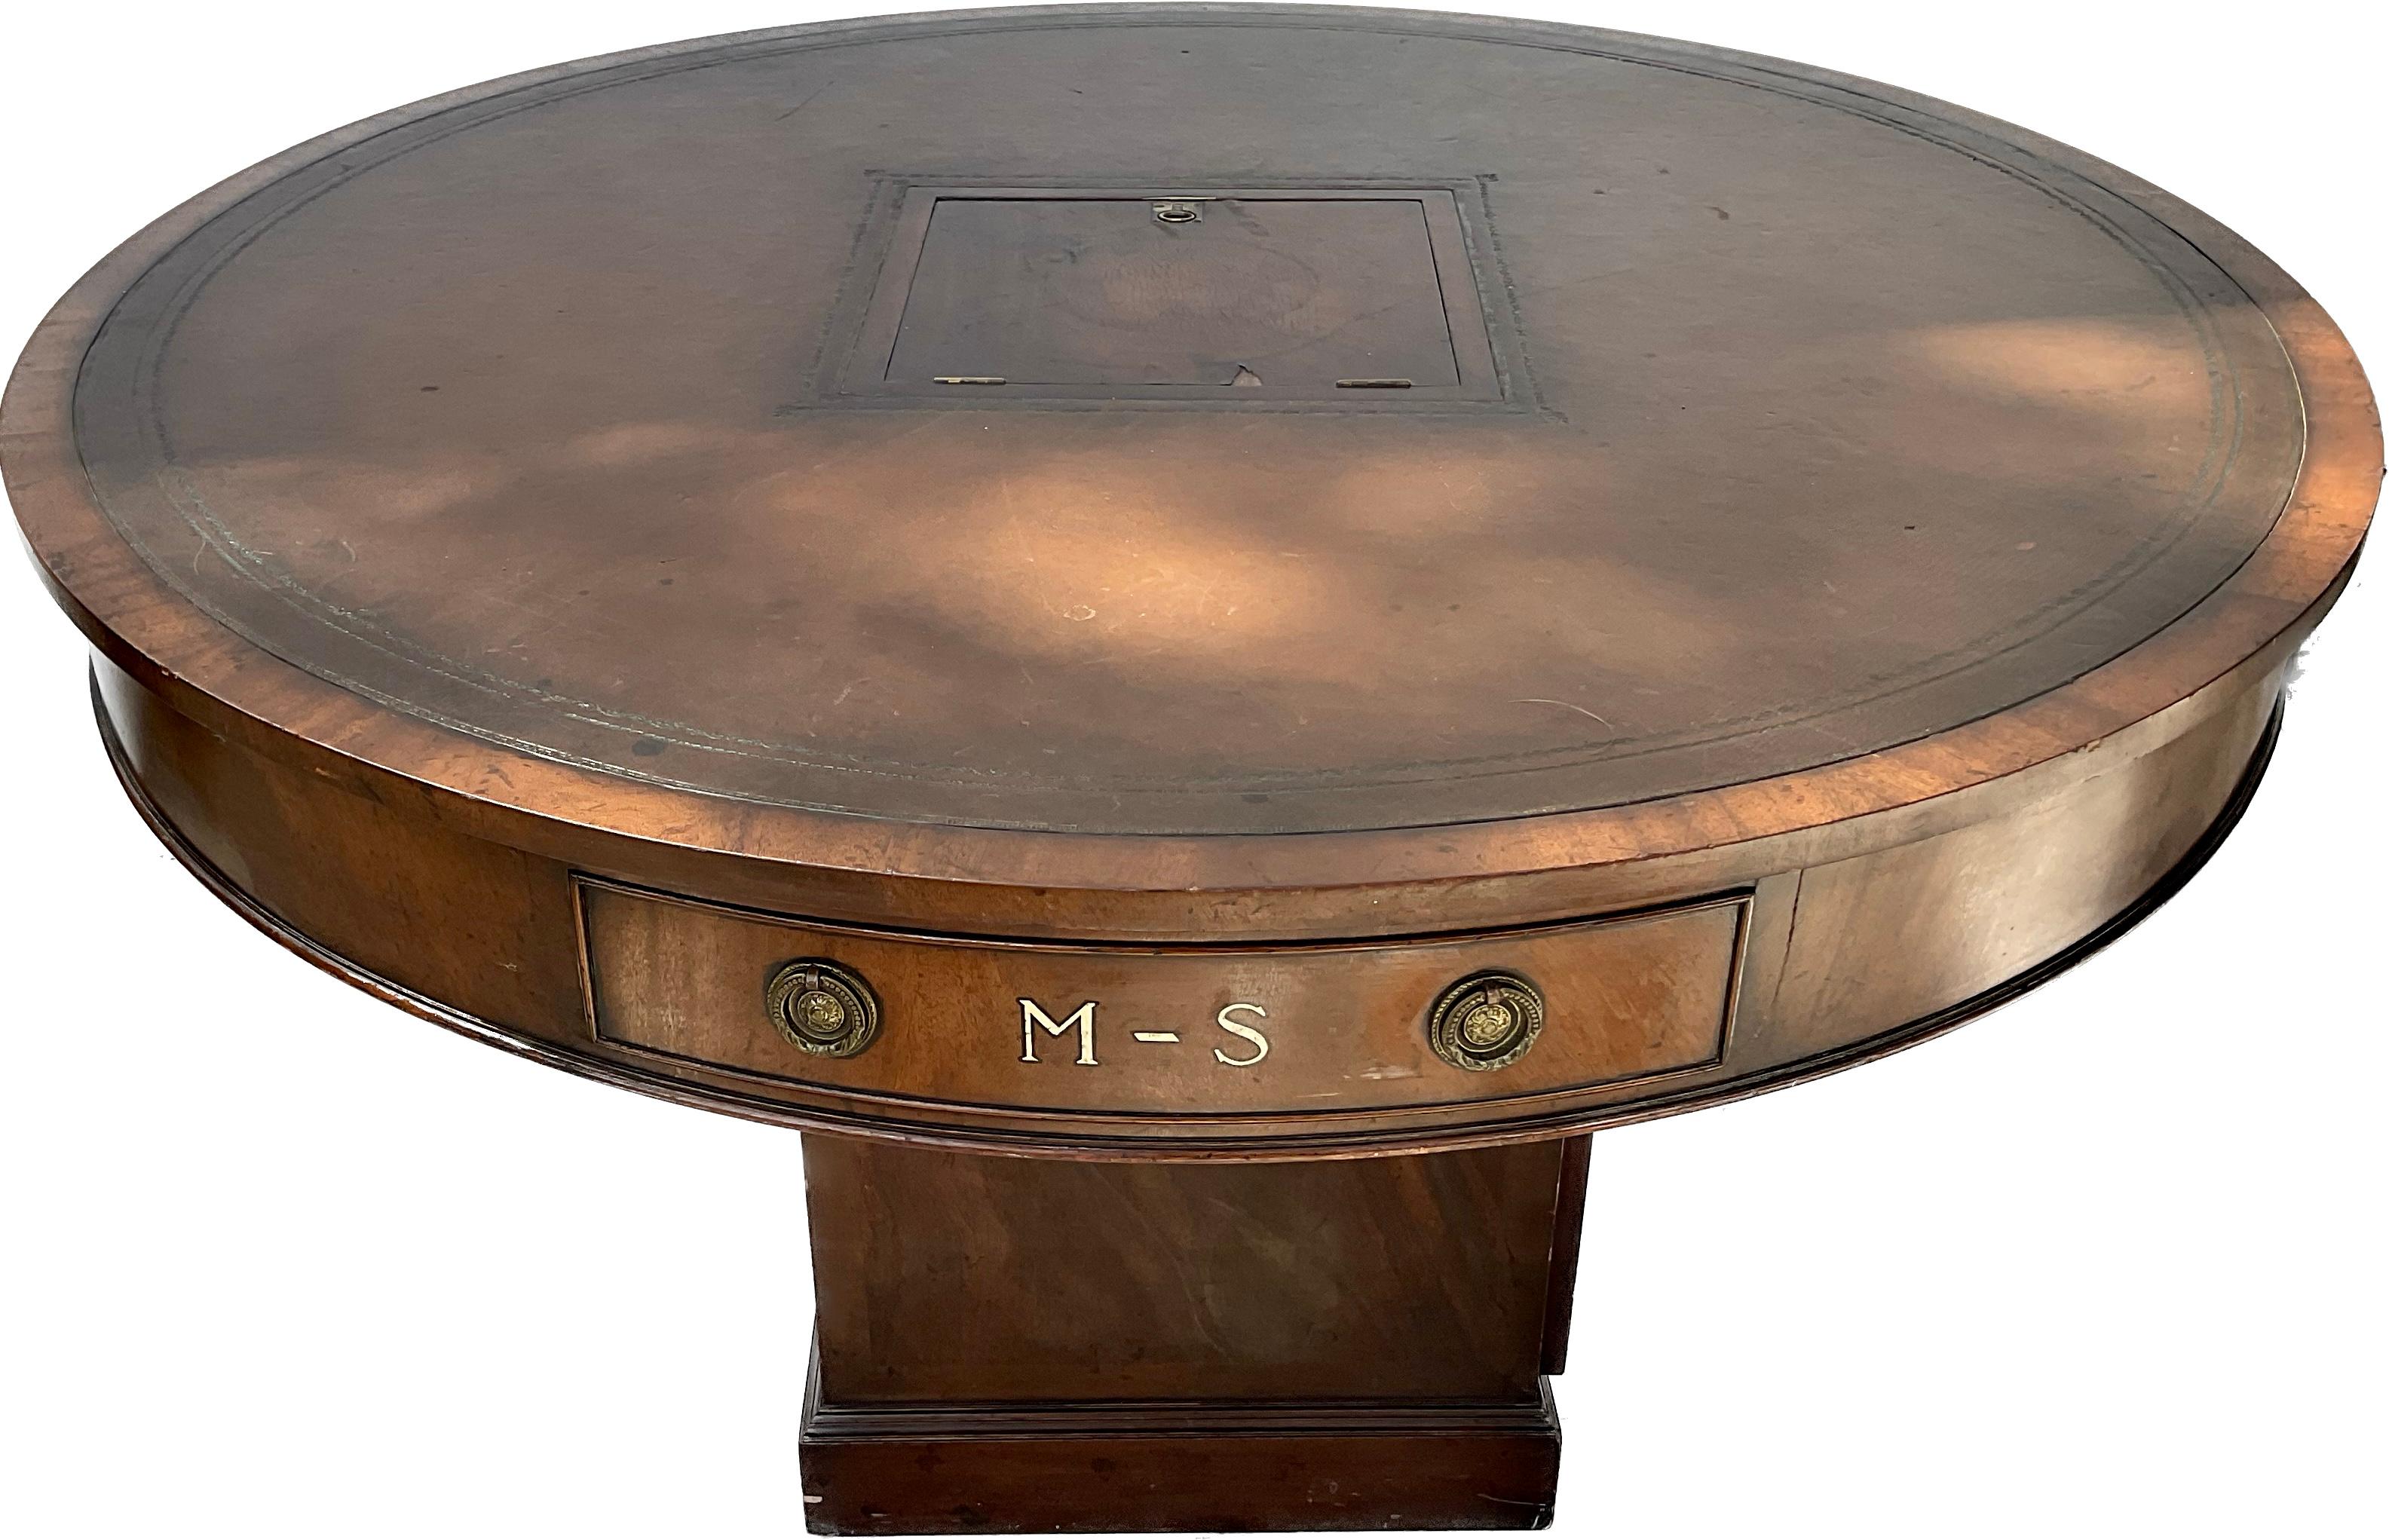 George III 19th Century English Revolving Rent Drum Table Leather Top